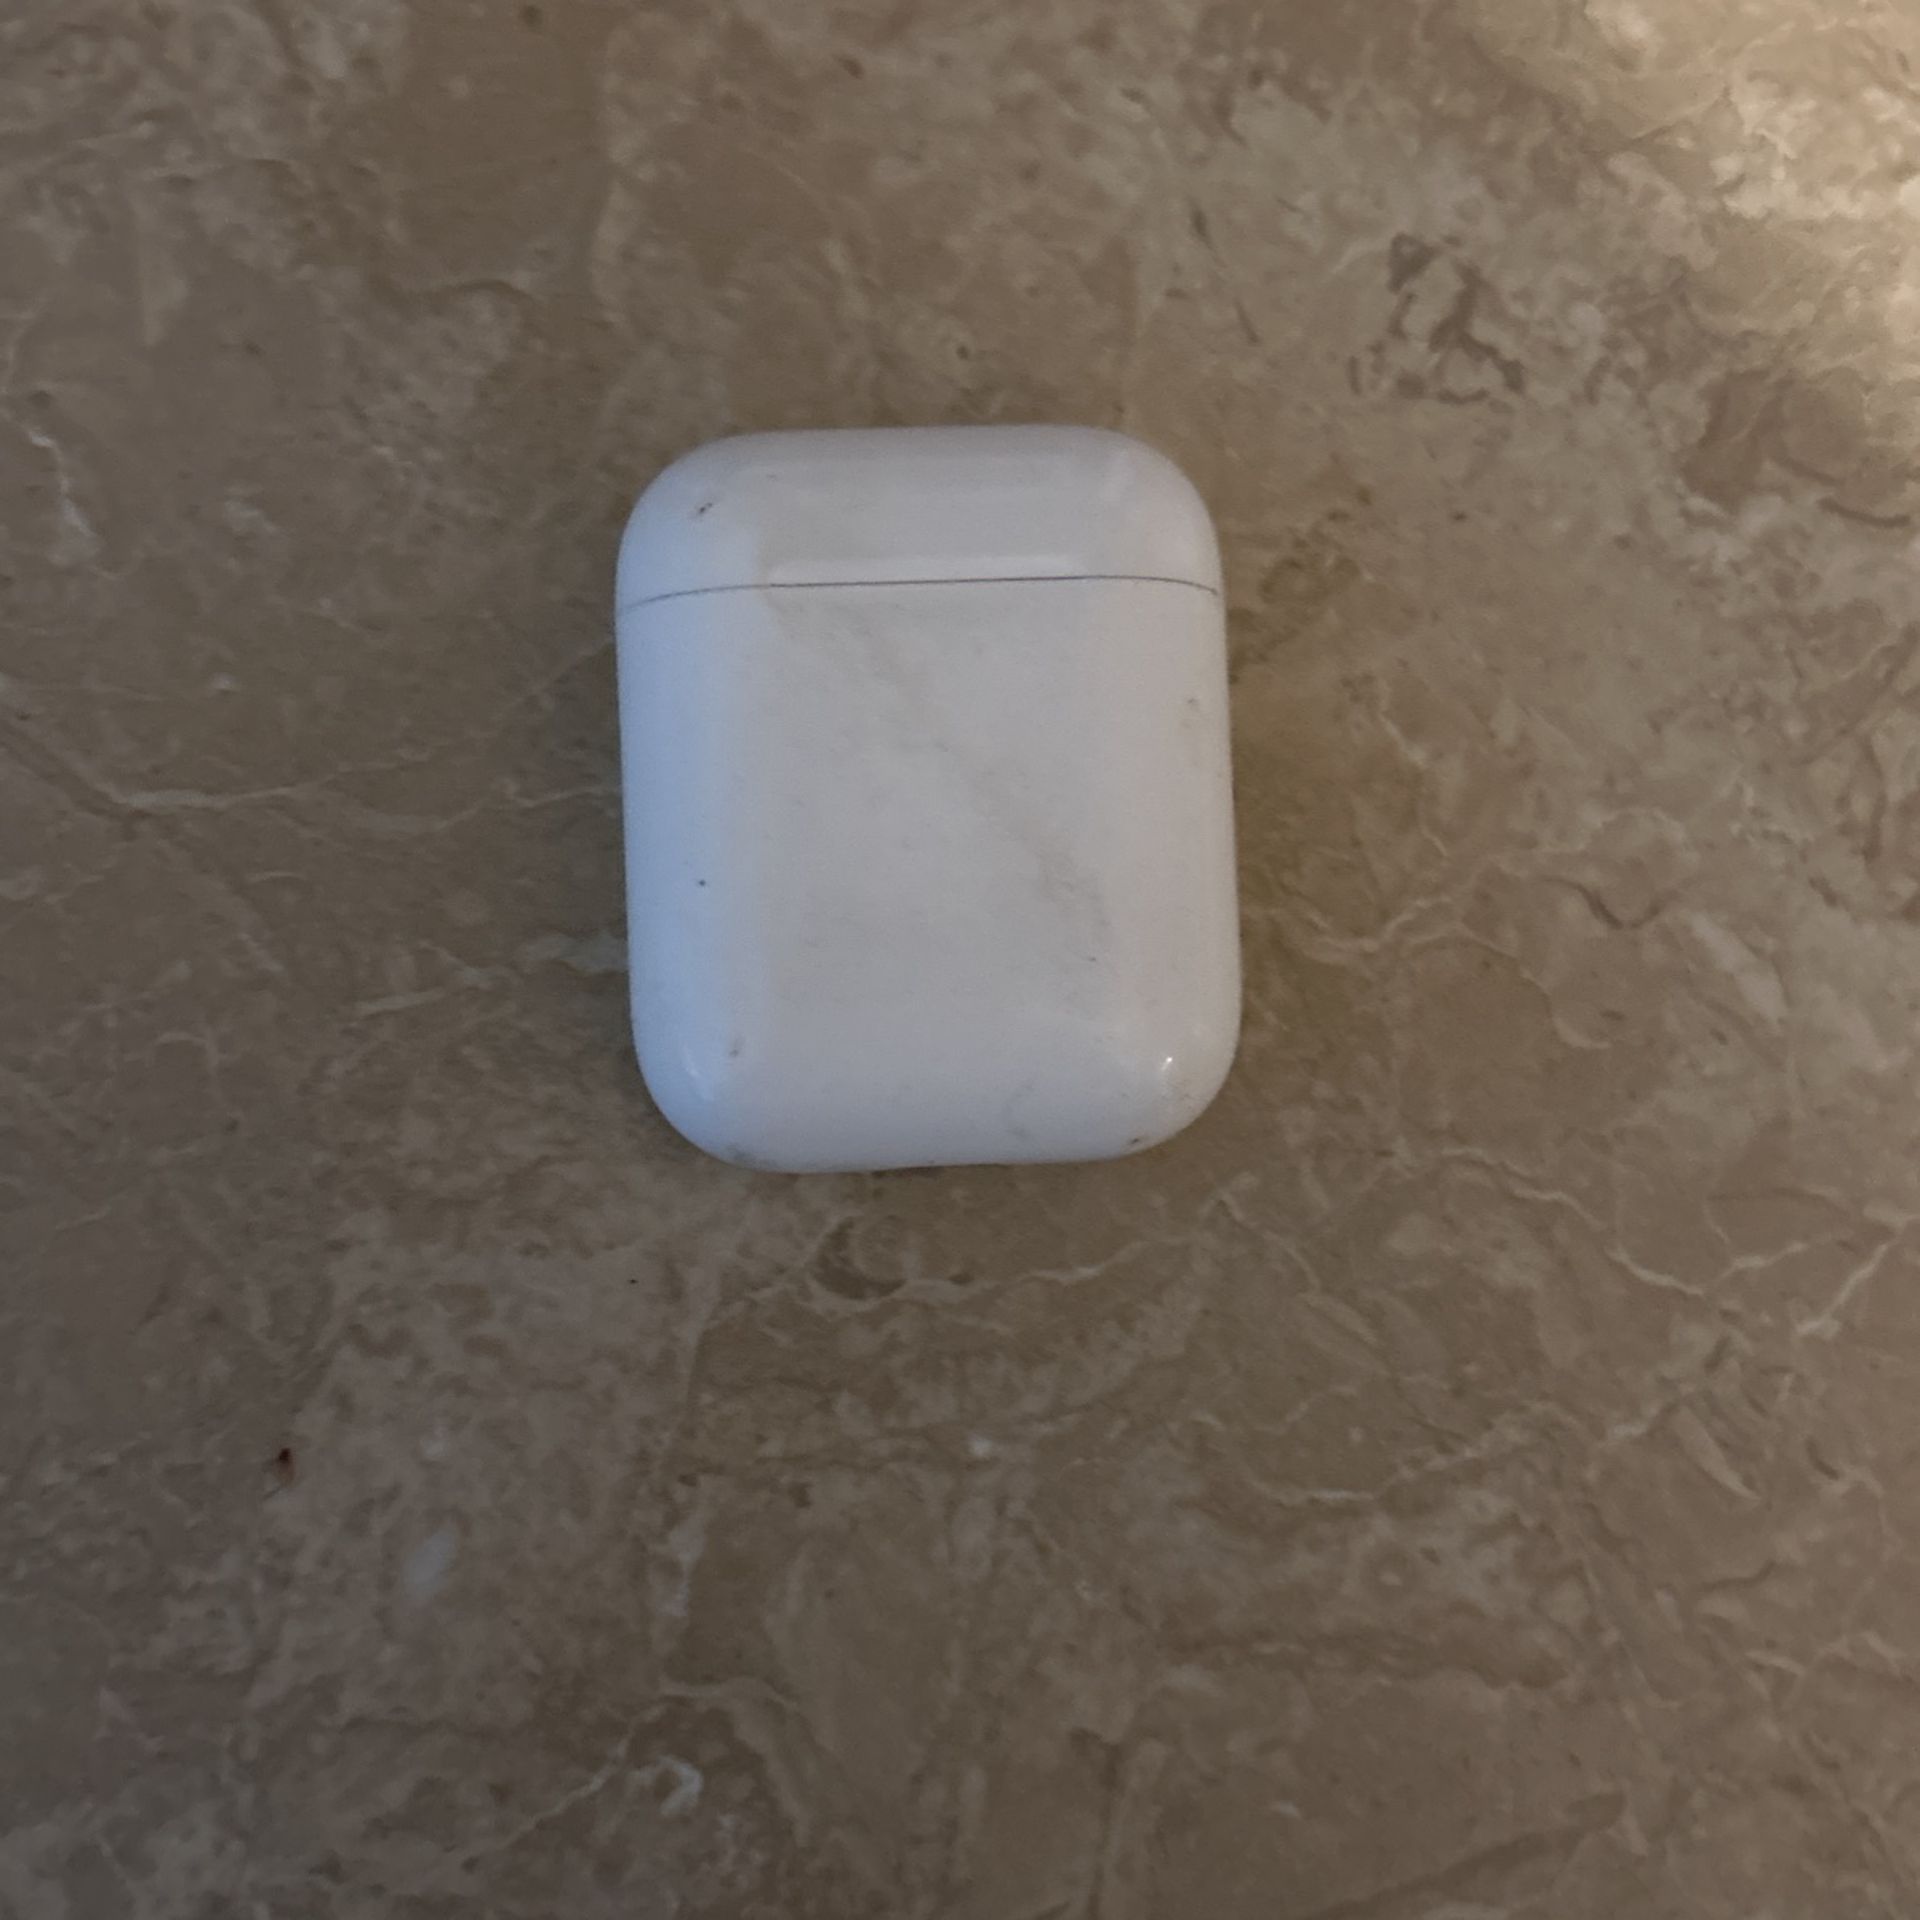 AirPod Left One Doesn’t Work That Good